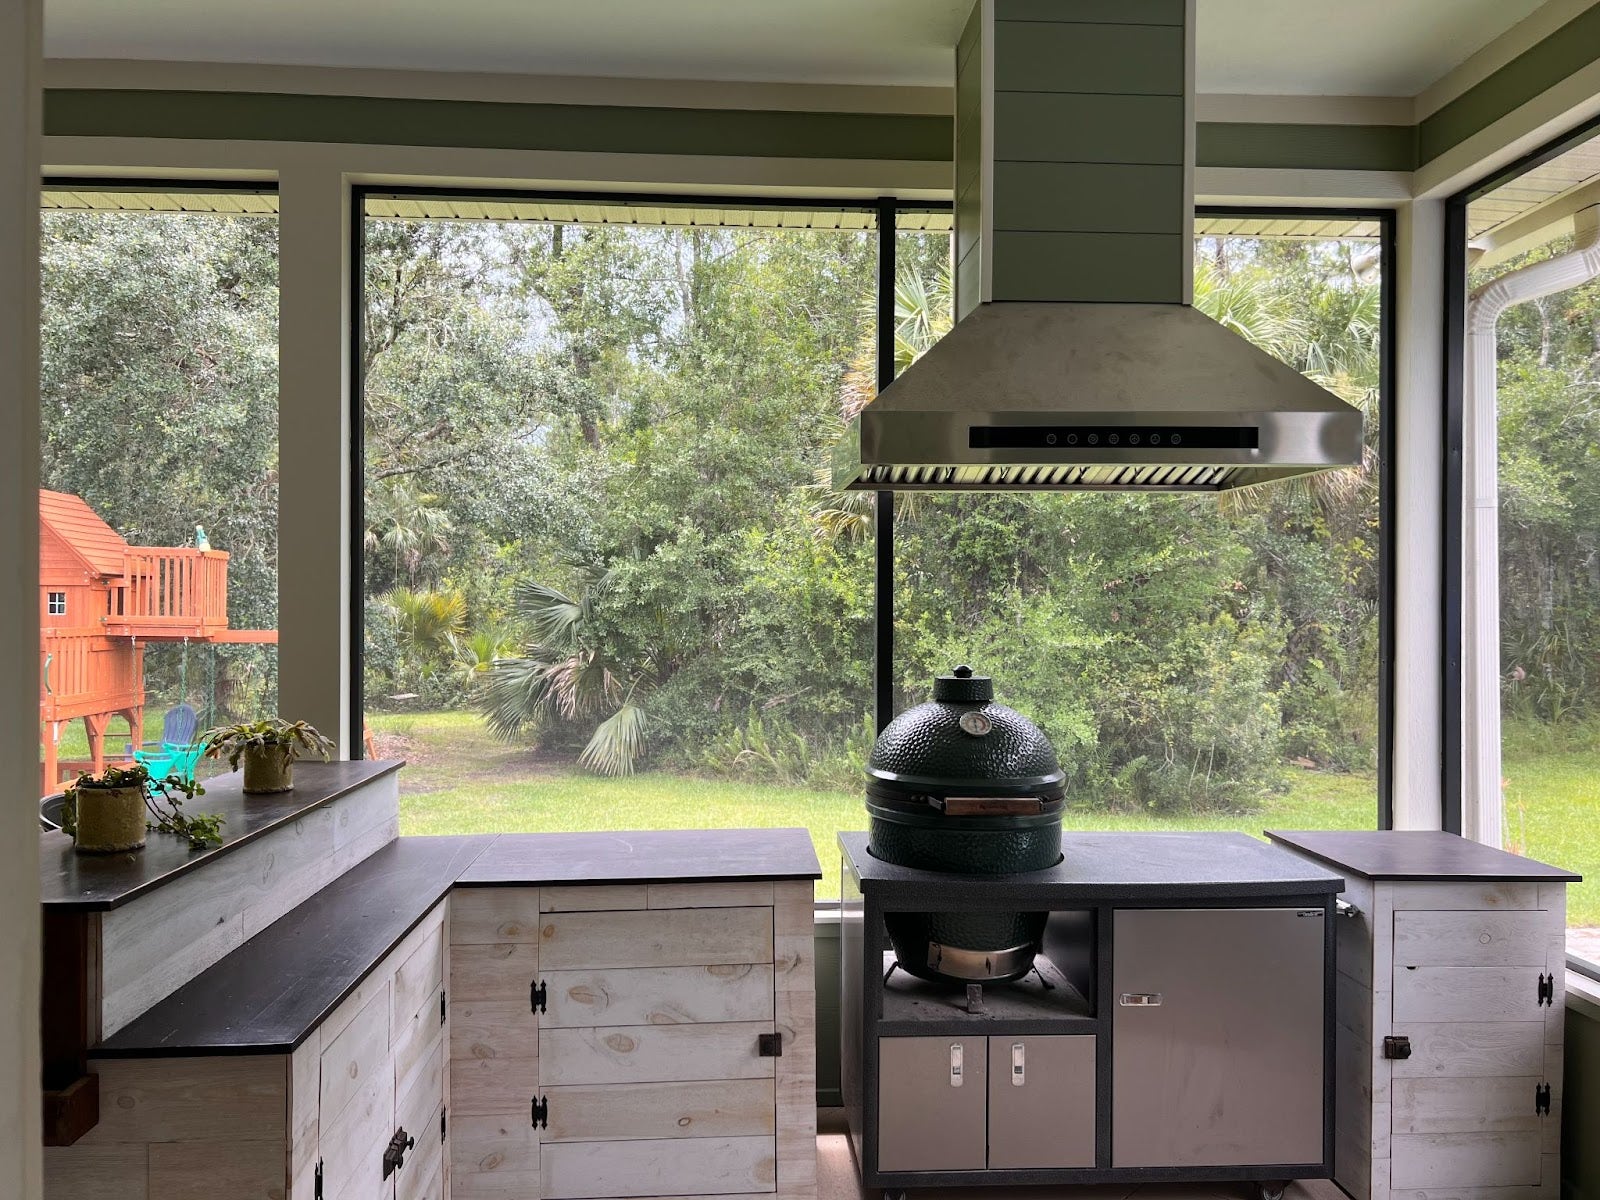 Modern outdoor grilling area featuring a green ceramic egg smoker, stainless steel vent hood, and light wood storage cabinets with a view of a backyard forest and children's play structure. - Proline Range Hoods - prolinerangehoods.com 